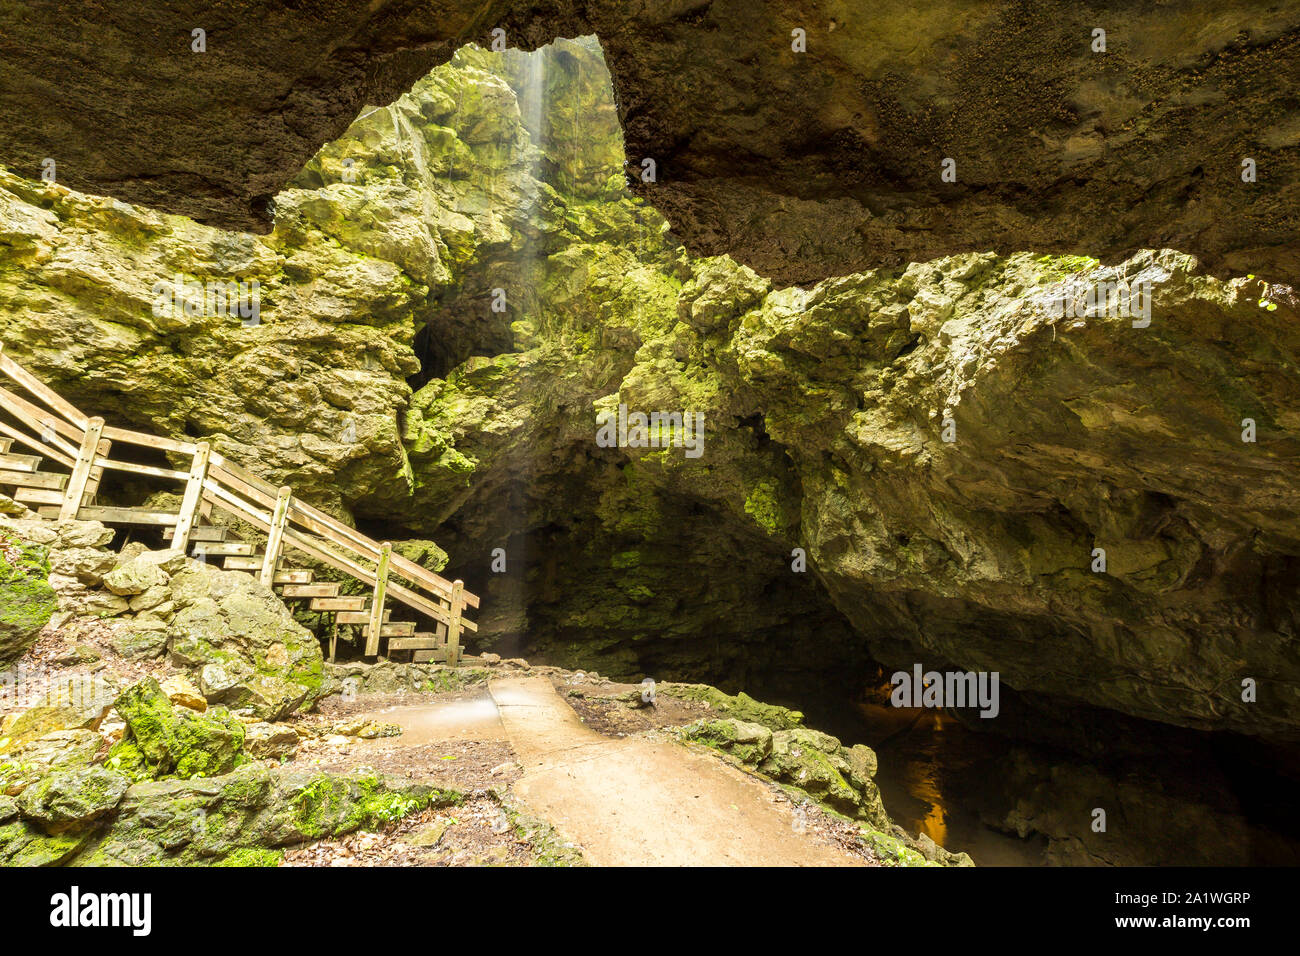 Inside A Cave Looking At The Entrance With Waterfall Stock Photo